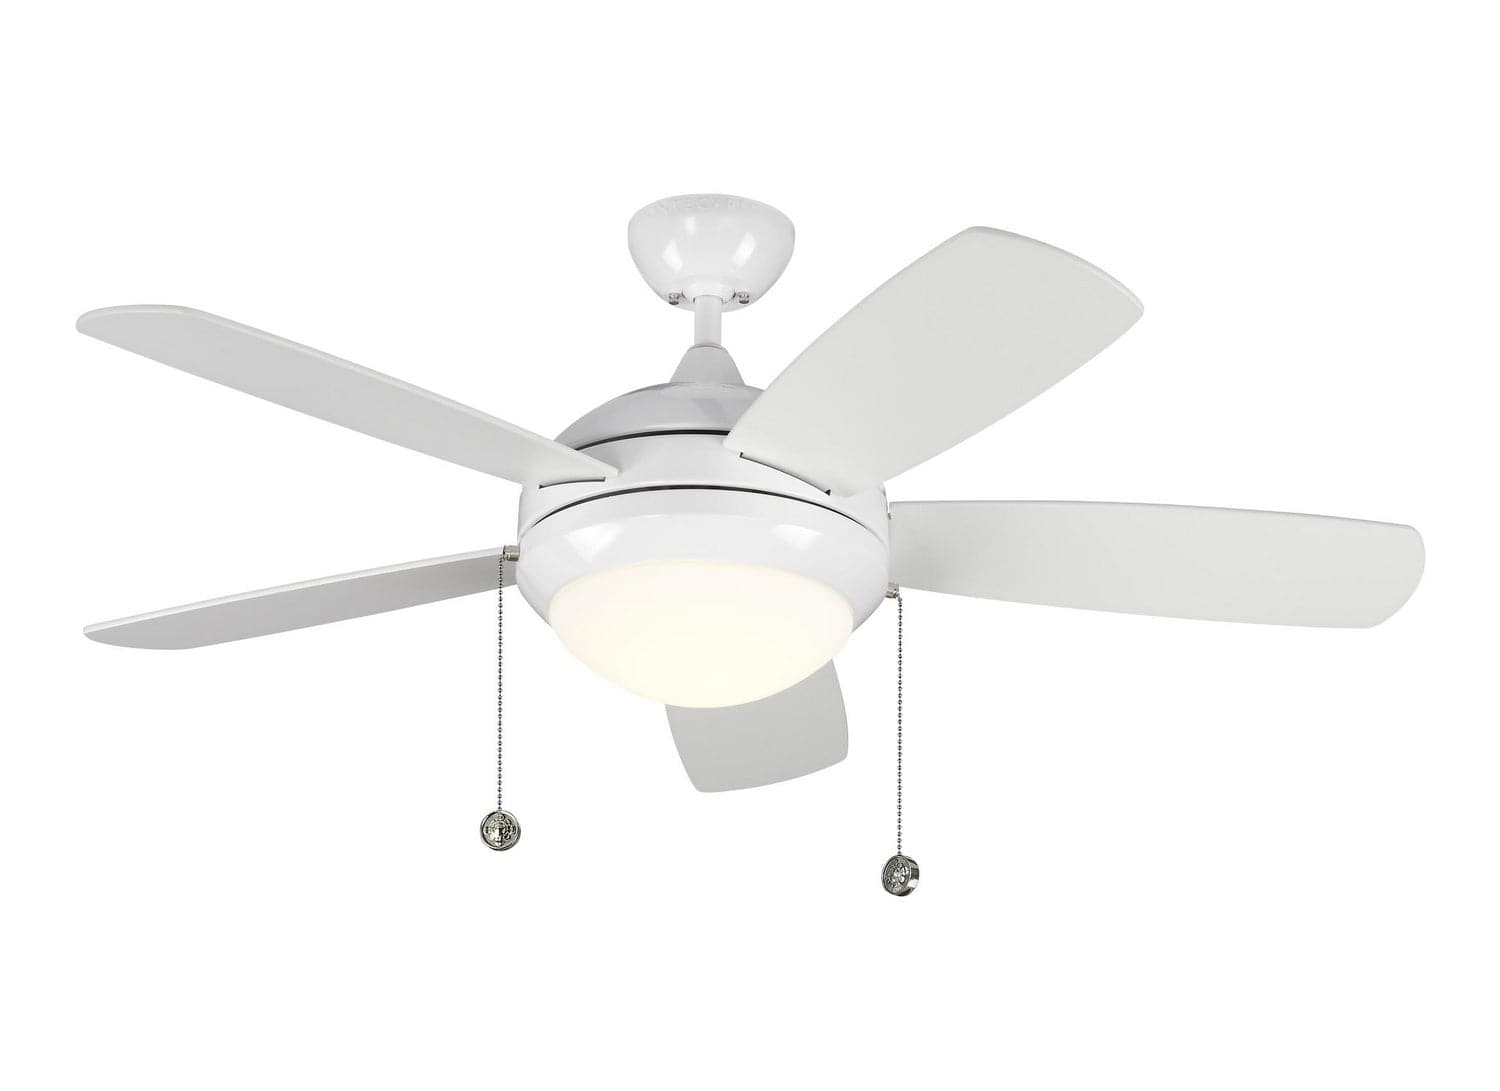 Generation Lighting. - 5DIC44WHD-V1 - 44``Ceiling Fan - Discus Classic 44 - White